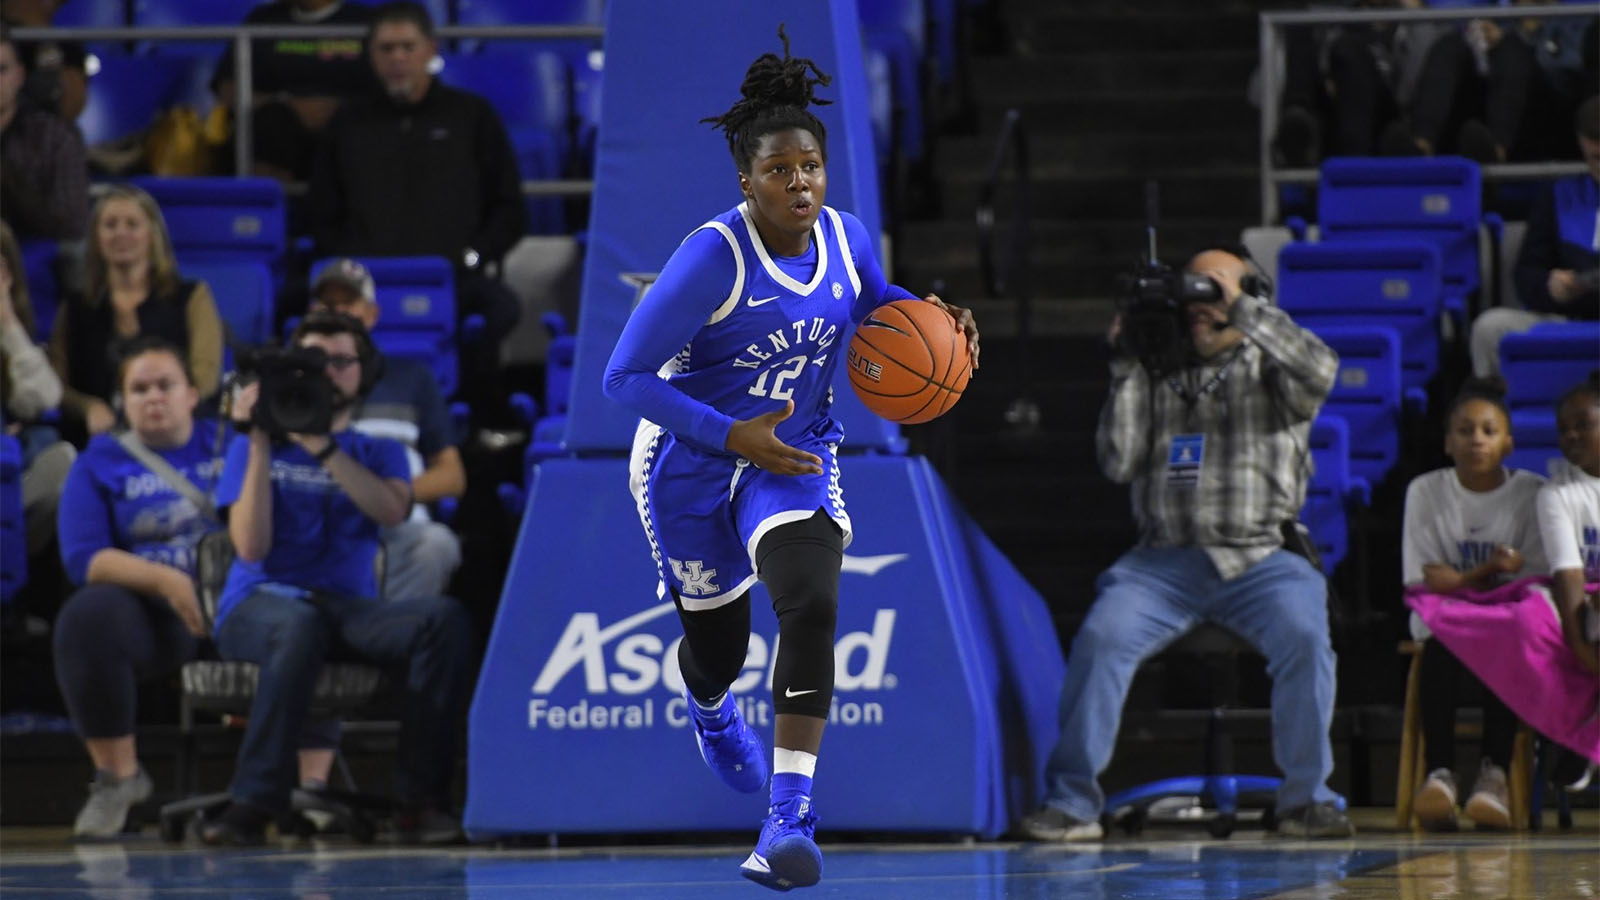 Paschal Leads No. 13 Kentucky Past Middle Tennessee